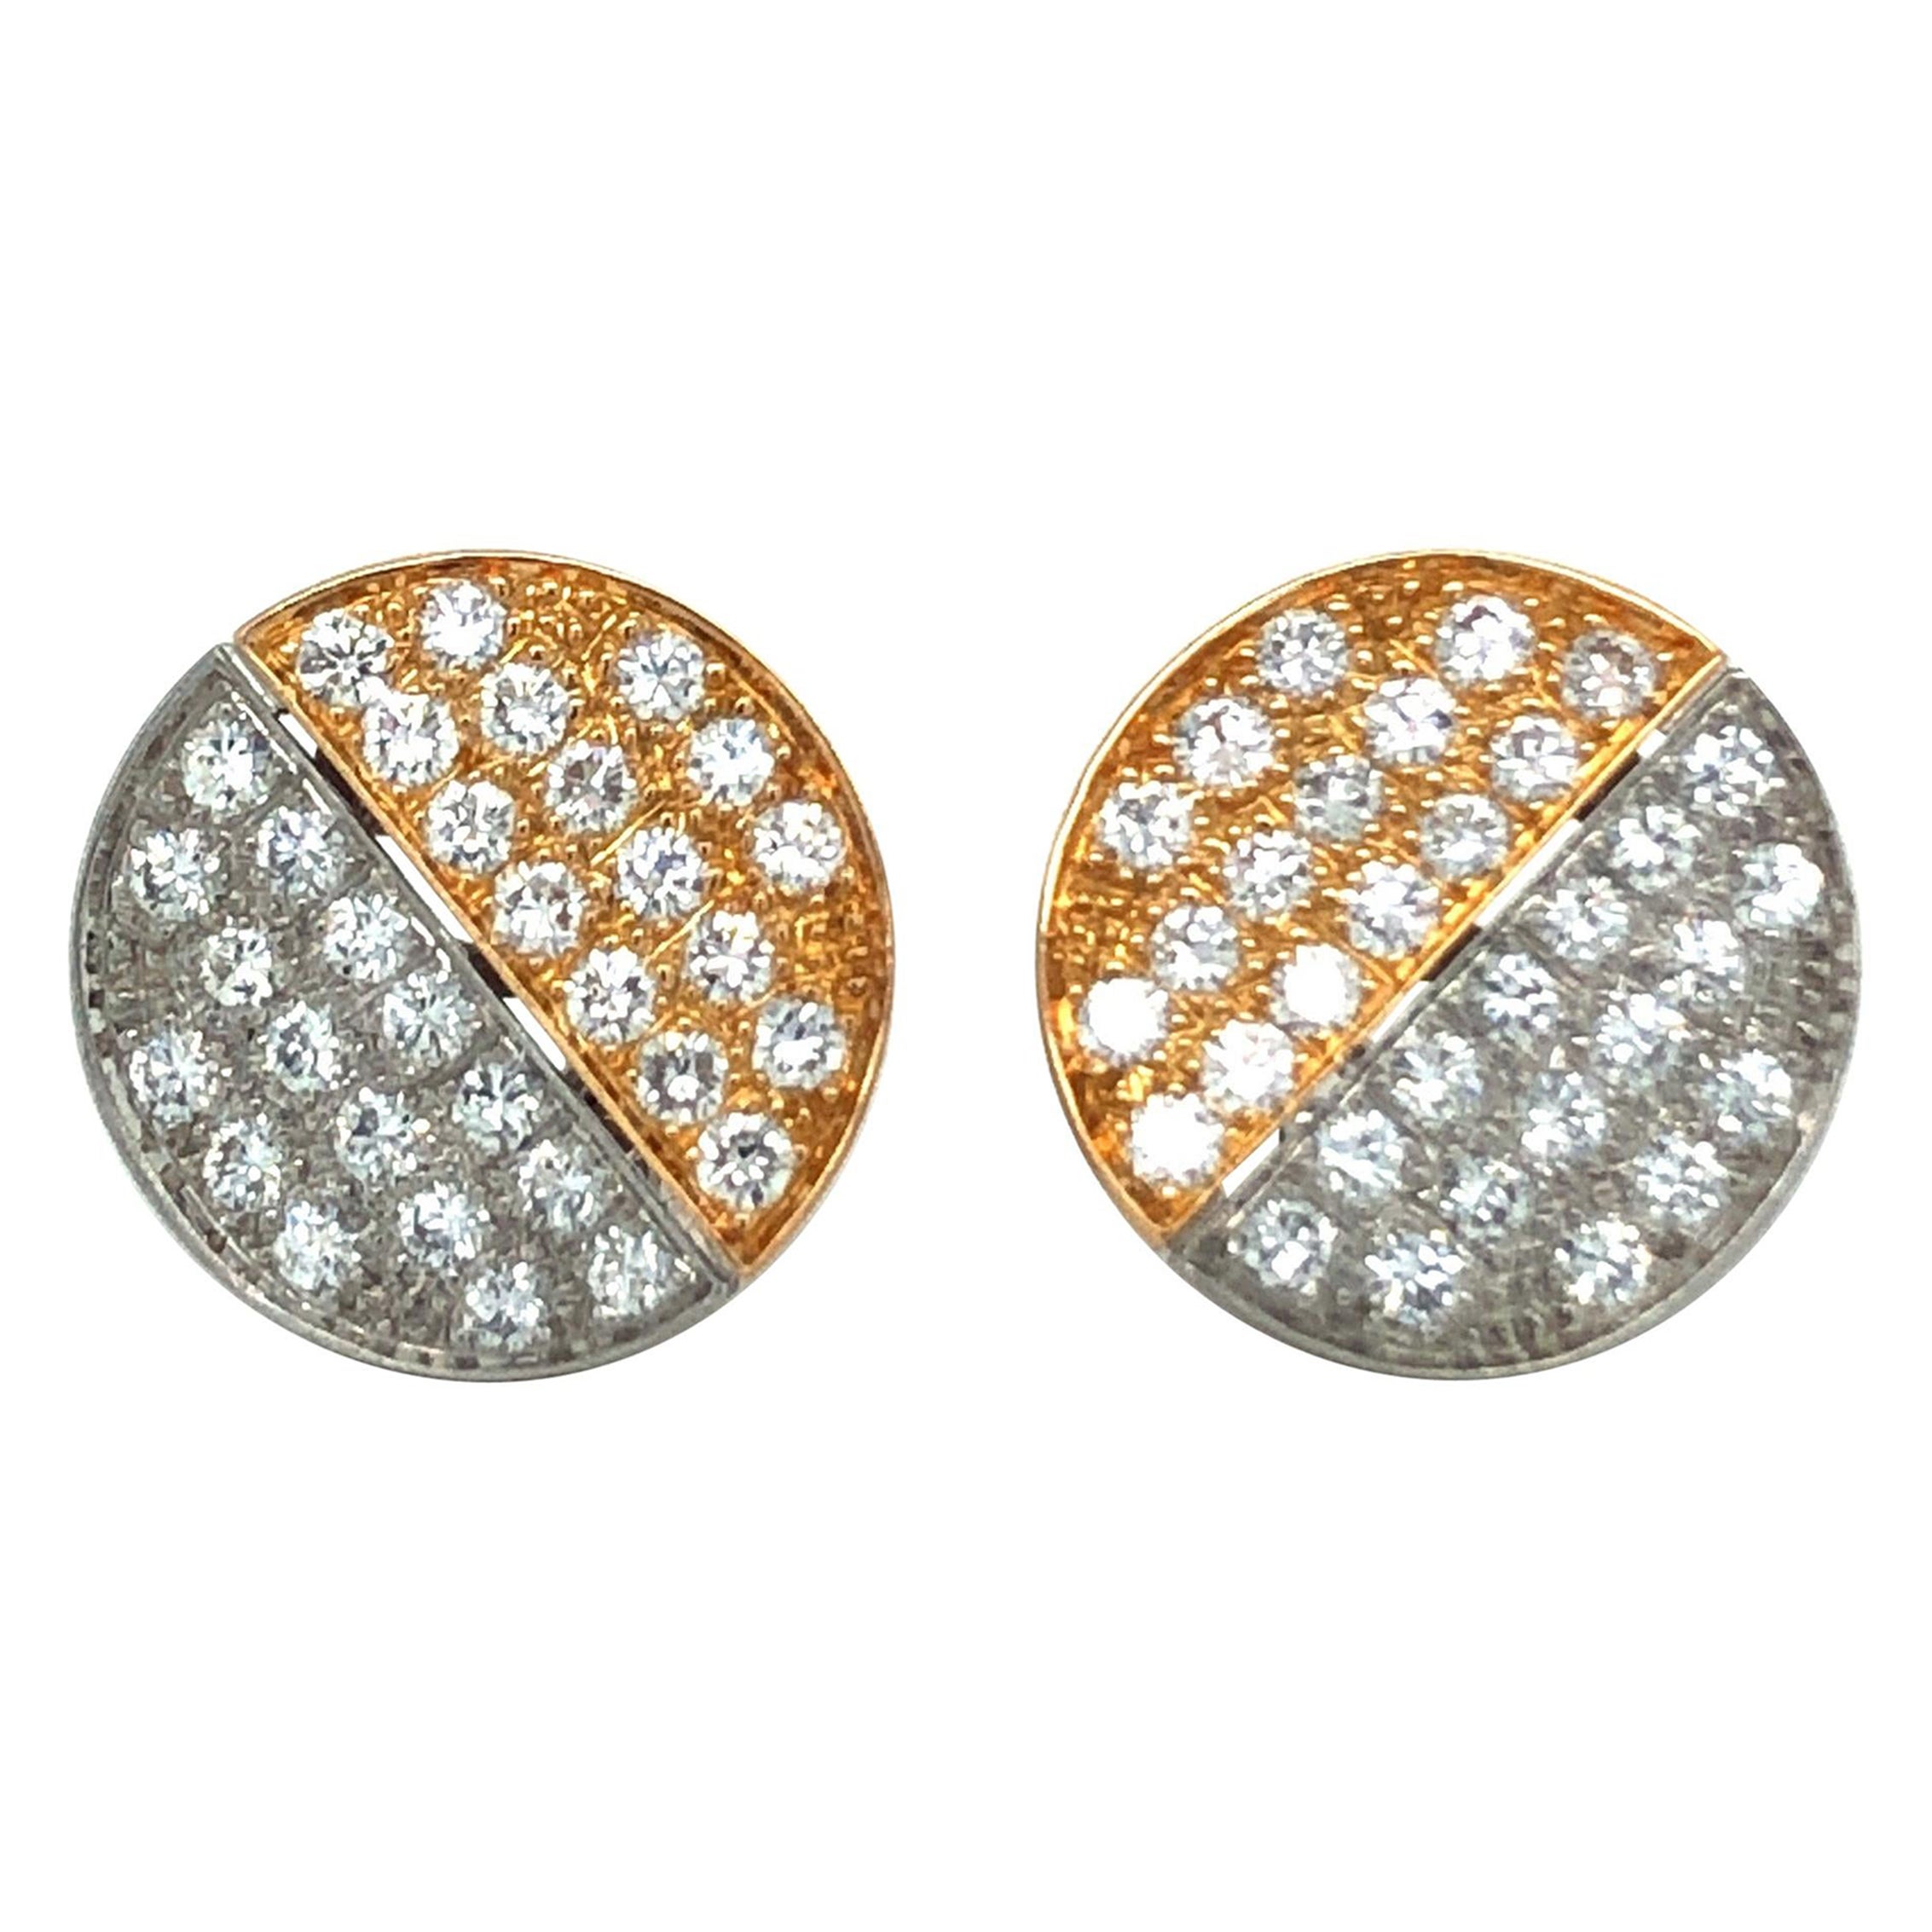 18 Karat Bi-Color Gold and Round-Cut Diamonds Ear Clips by Binder For Sale